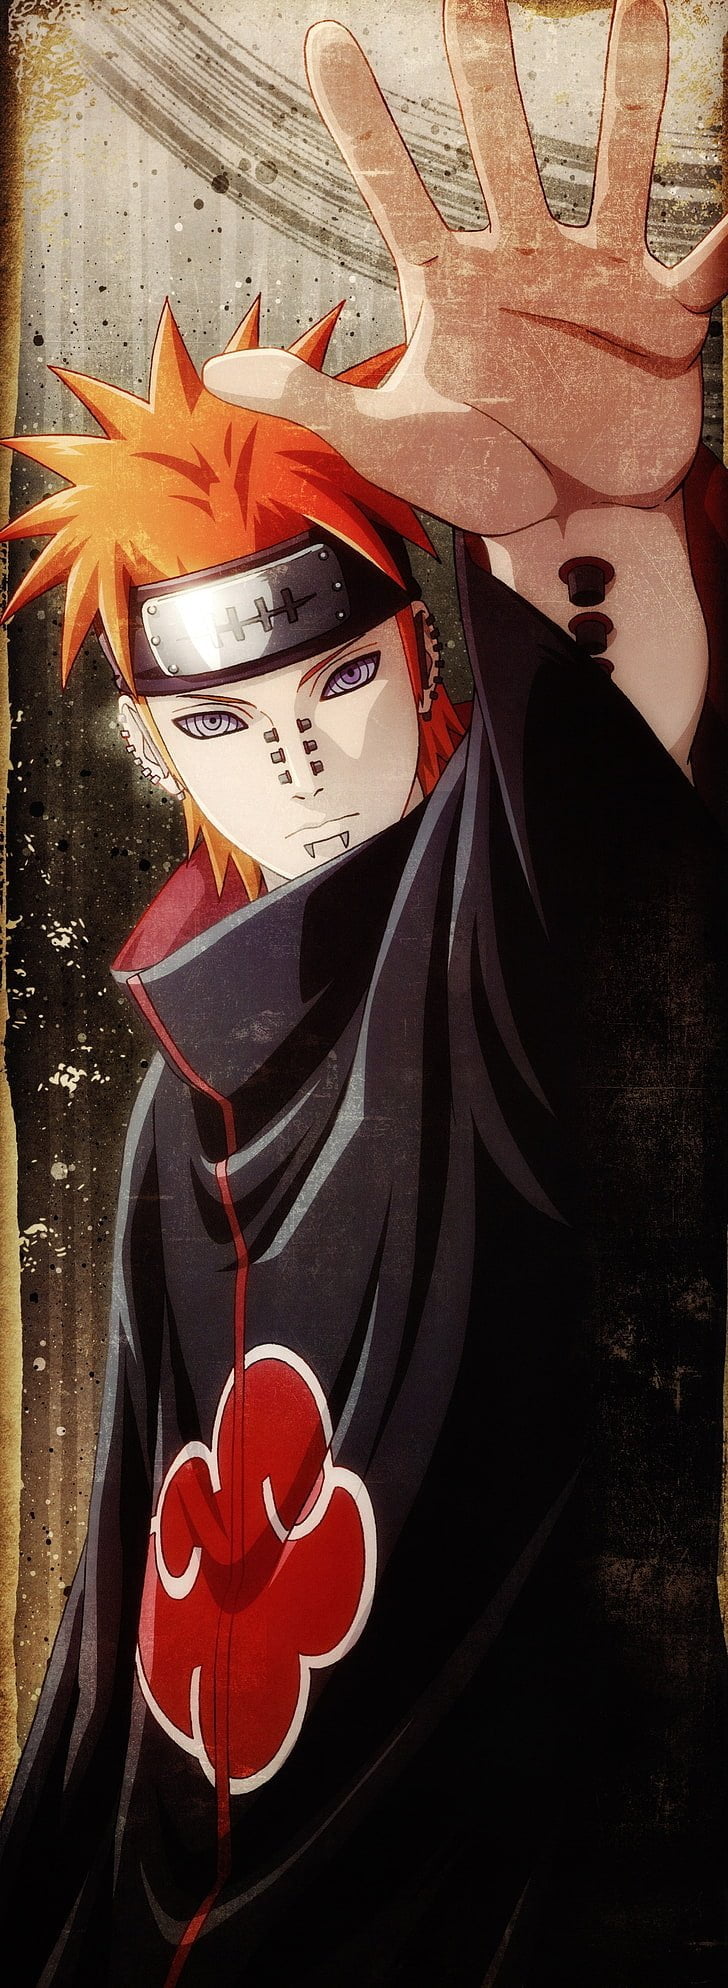 Aesthetic Naruto Pain Wallpapers